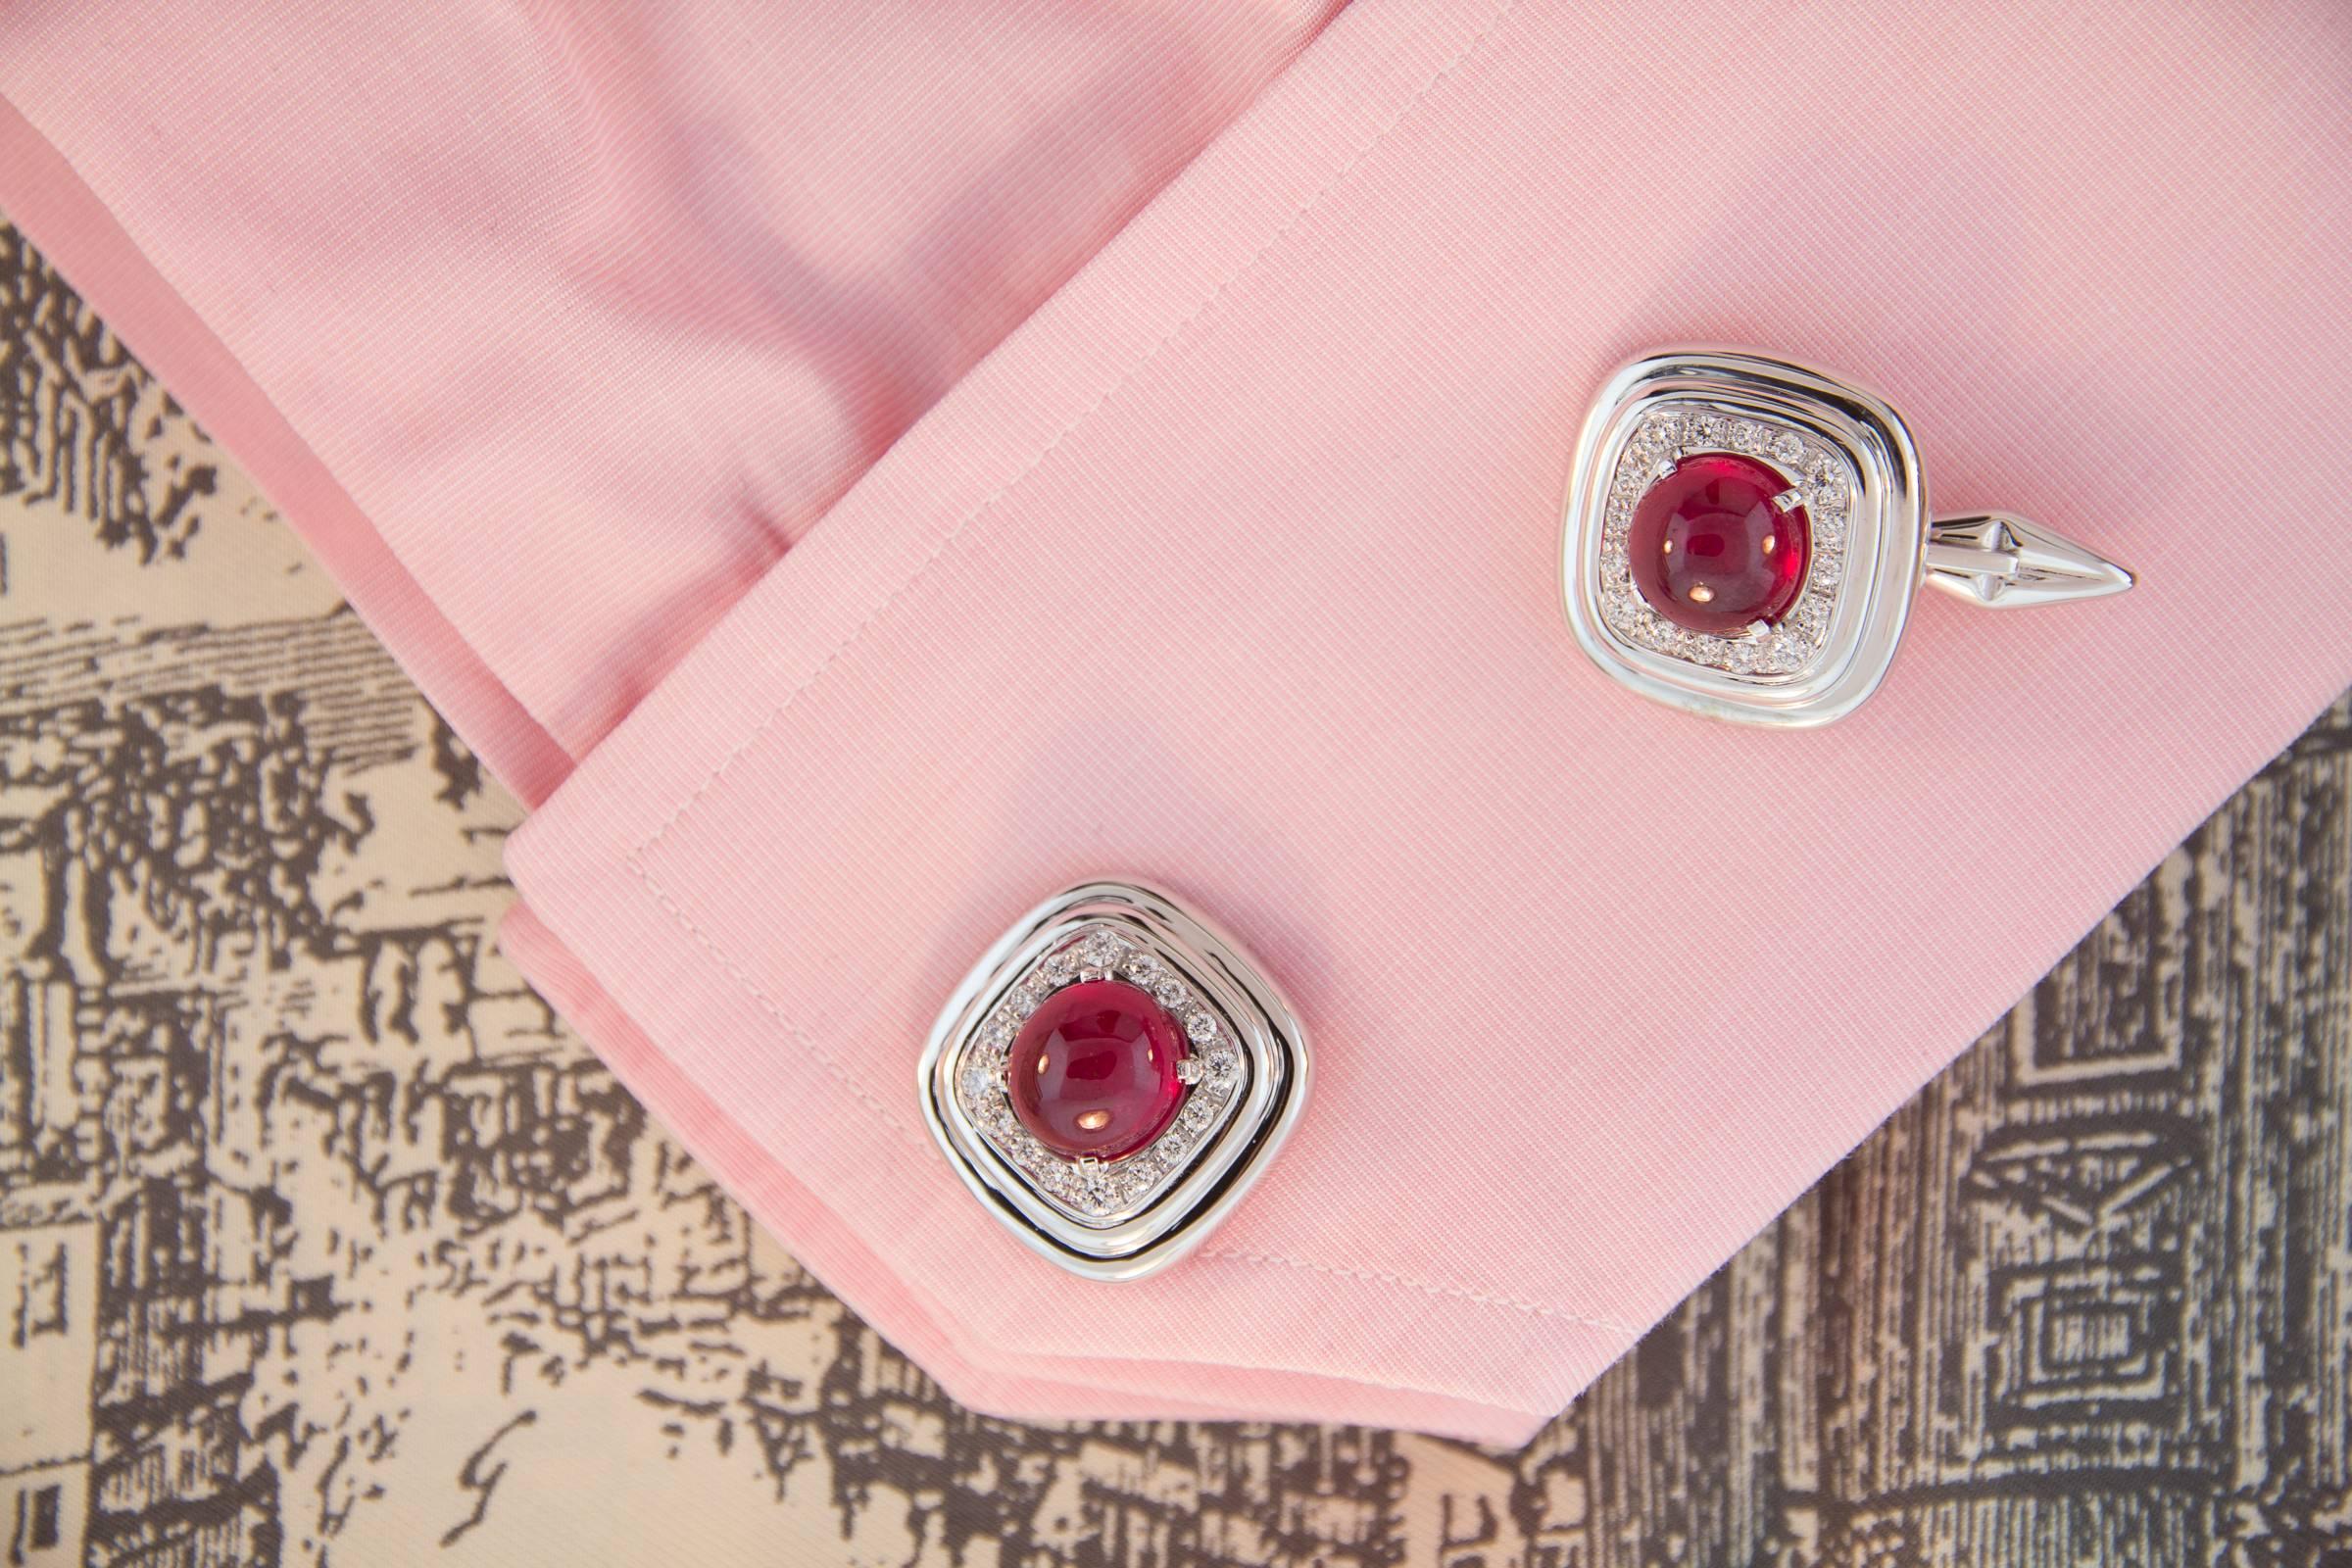 The ruby and diamond cufflinks feature 2 large cabochon rubies weighing a total of 15.47 carats. They are surrounded by a crown of round diamonds for a weight of 0.86 carats. The diamonds are of top quality (color, clarity and cut). The jeweled part